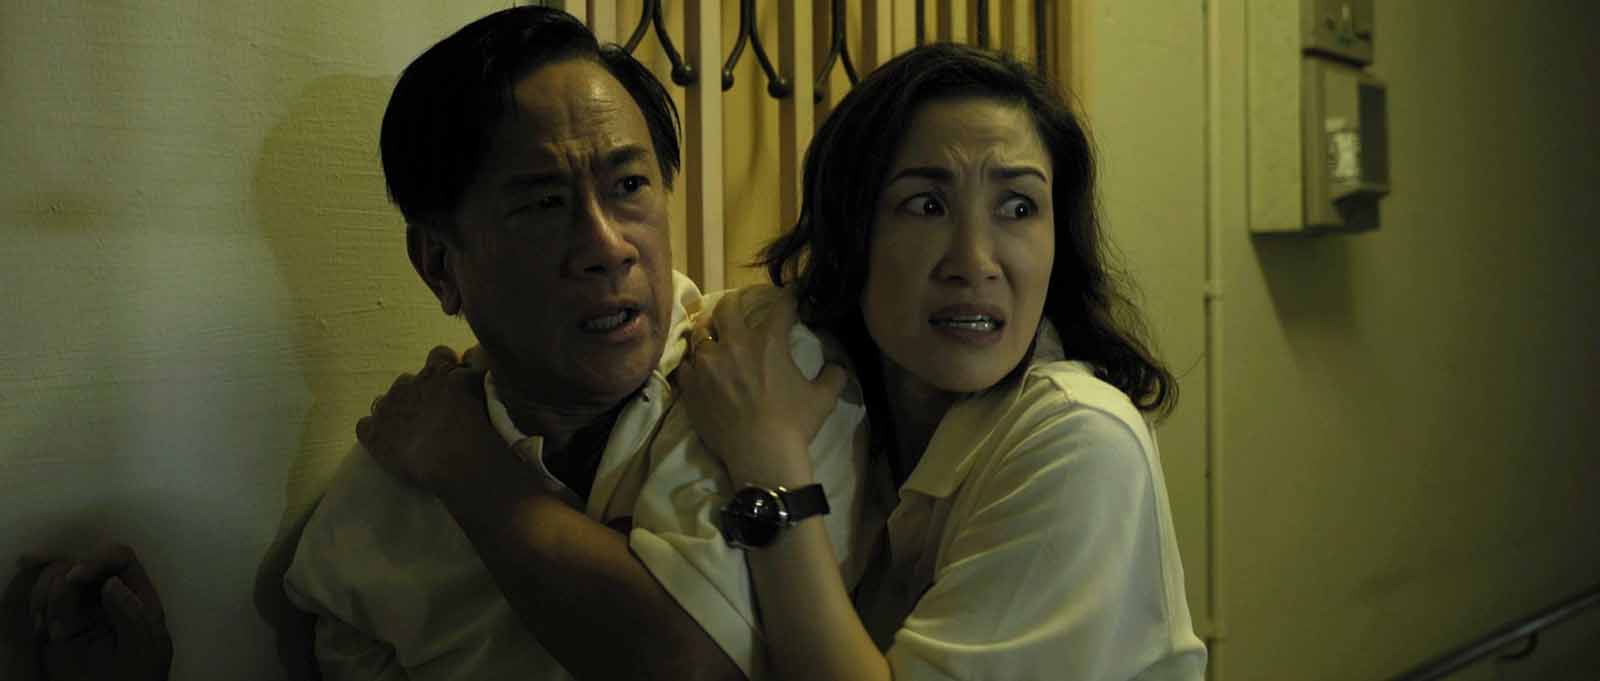 Goh Ming Siu and Scott C. Hillyard have collaborated on their first film together, 'Repossession'. The horror feature is starting its film festival circuit.